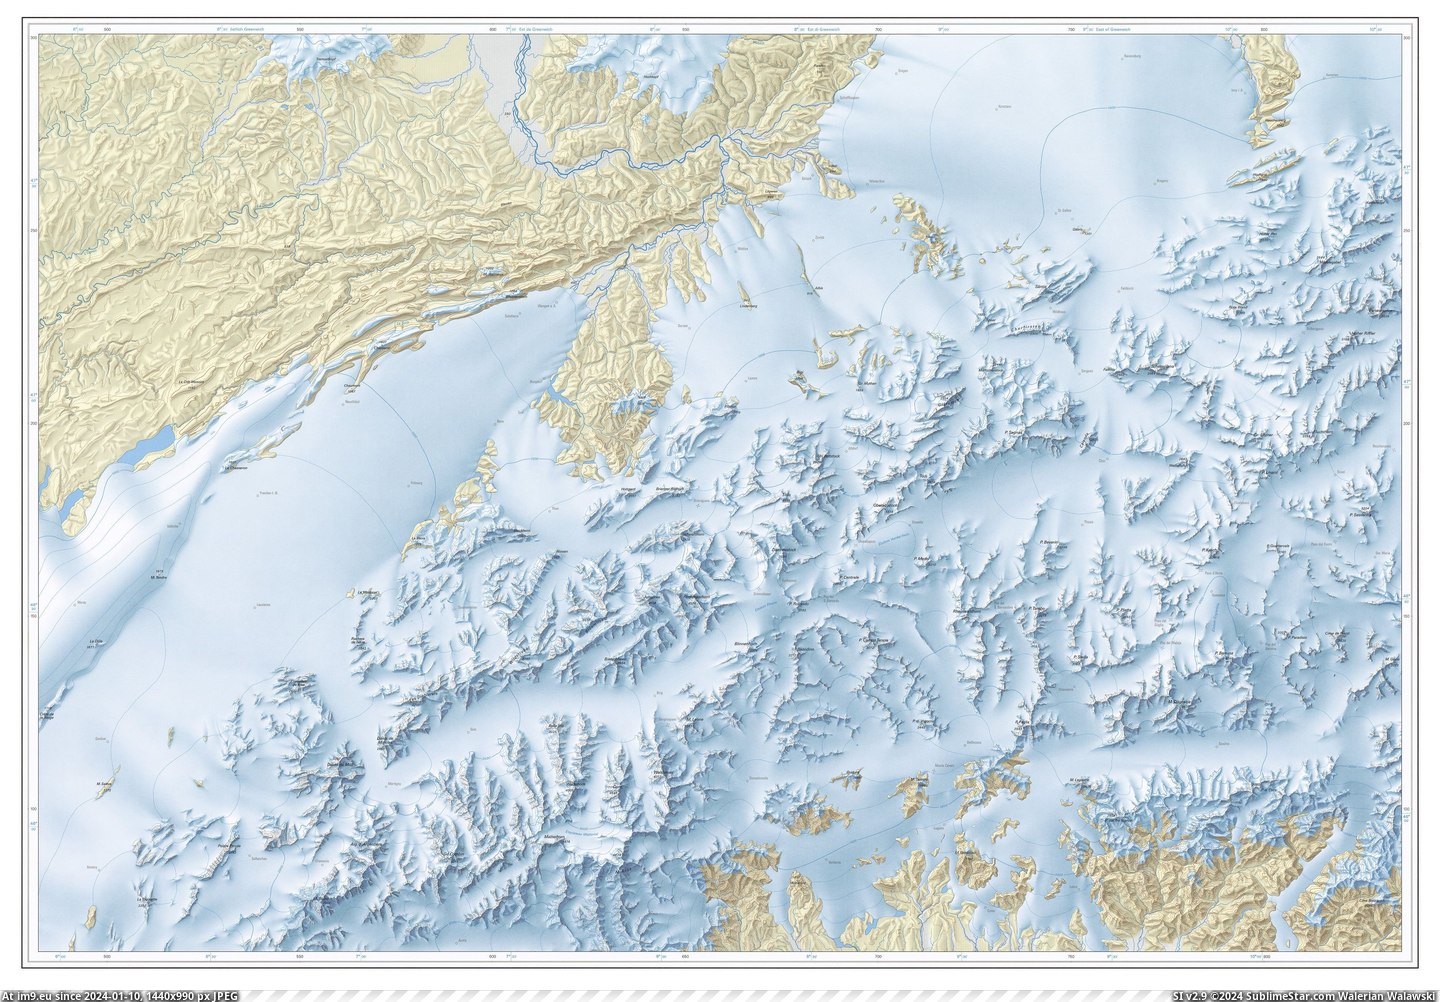 #Source #Switzerland #Interactive #Larger #Versions #Swiss #Maximum #Glacial [Mapporn] Switzerland during the last glacial maximum. Larger and interactive versions in comments. [3735x2580] Source: Swiss Fe Pic. (Image of album My r/MAPS favs))